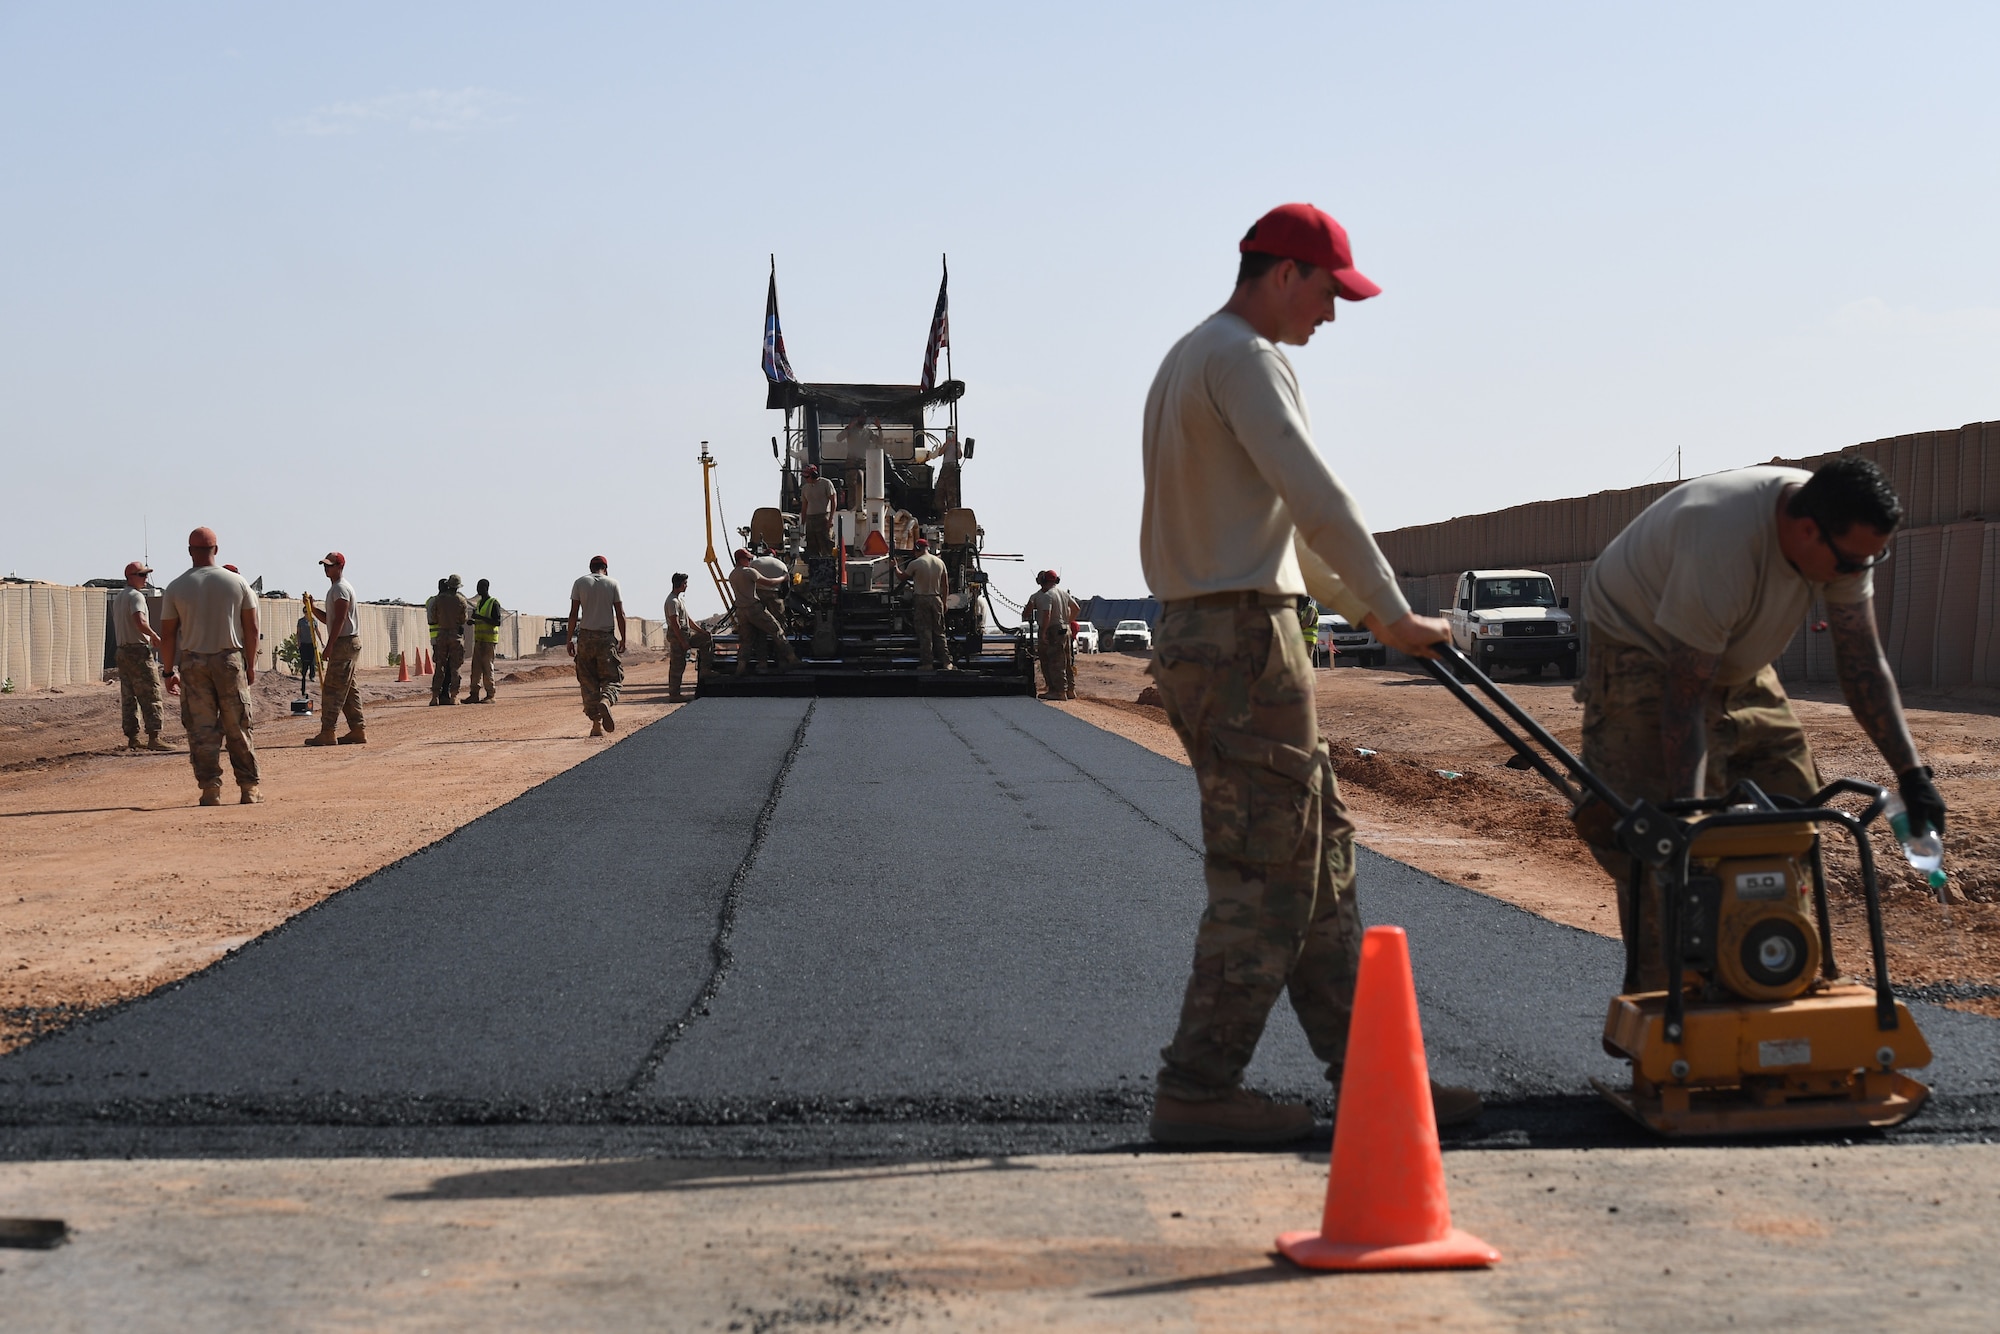 U.S. Air Force 31st Expeditionary Rapid Engineer Deployable Heavy Operation Repair Squadron Engineer Airmen prepare a flight line test strip to allow the engineers to test the asphalt and equipment to make adjustments before laying the runway. (U.S. Air Force photo by Tech. Sgt. Rachelle Coleman)